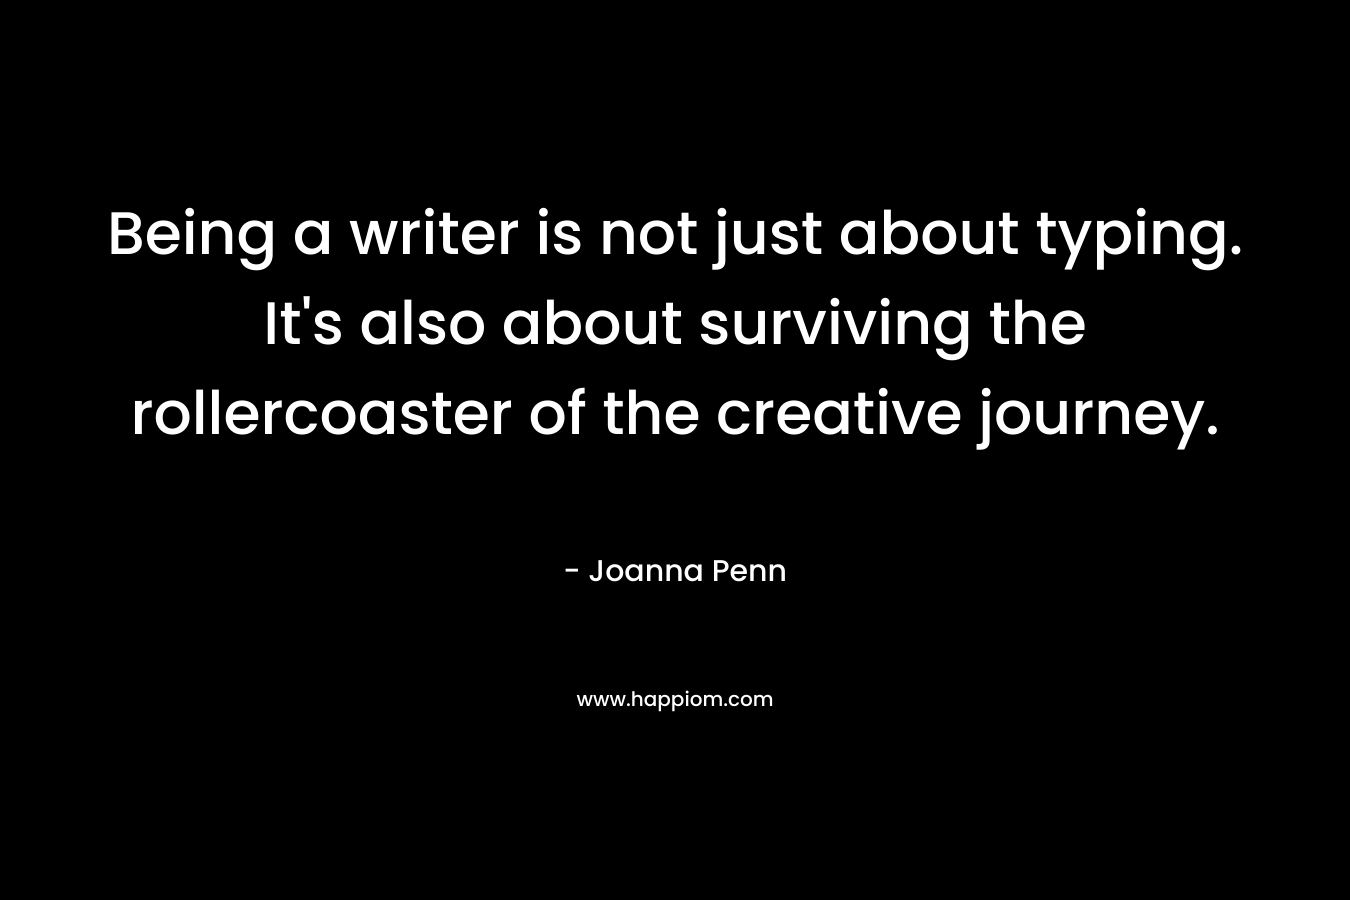 Being a writer is not just about typing. It’s also about surviving the rollercoaster of the creative journey. – Joanna Penn